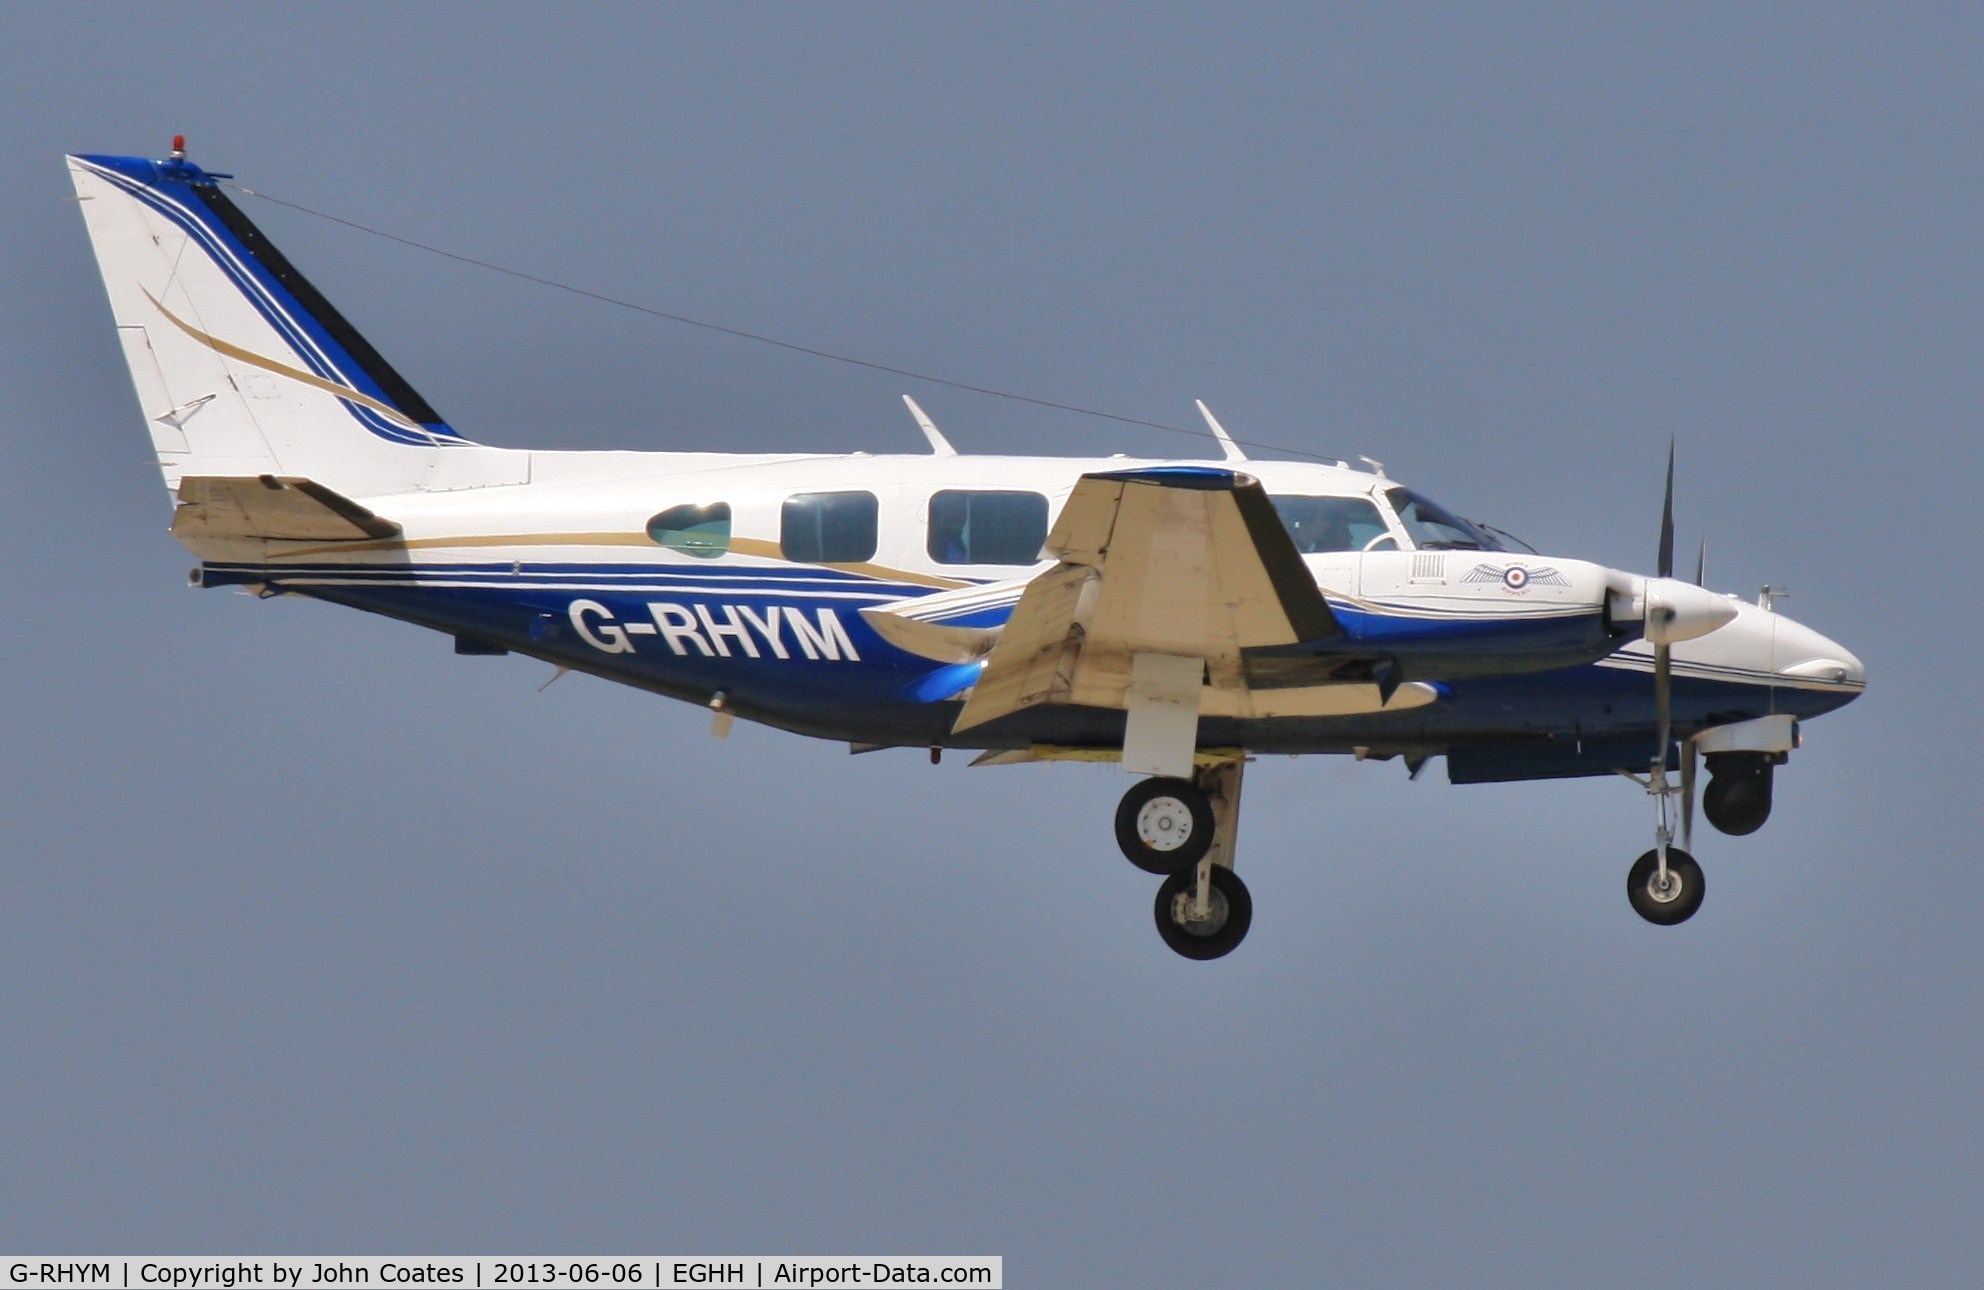 G-RHYM, 1972 Piper PA-31-310 Navajo C/N 31-815, Low approach to 08